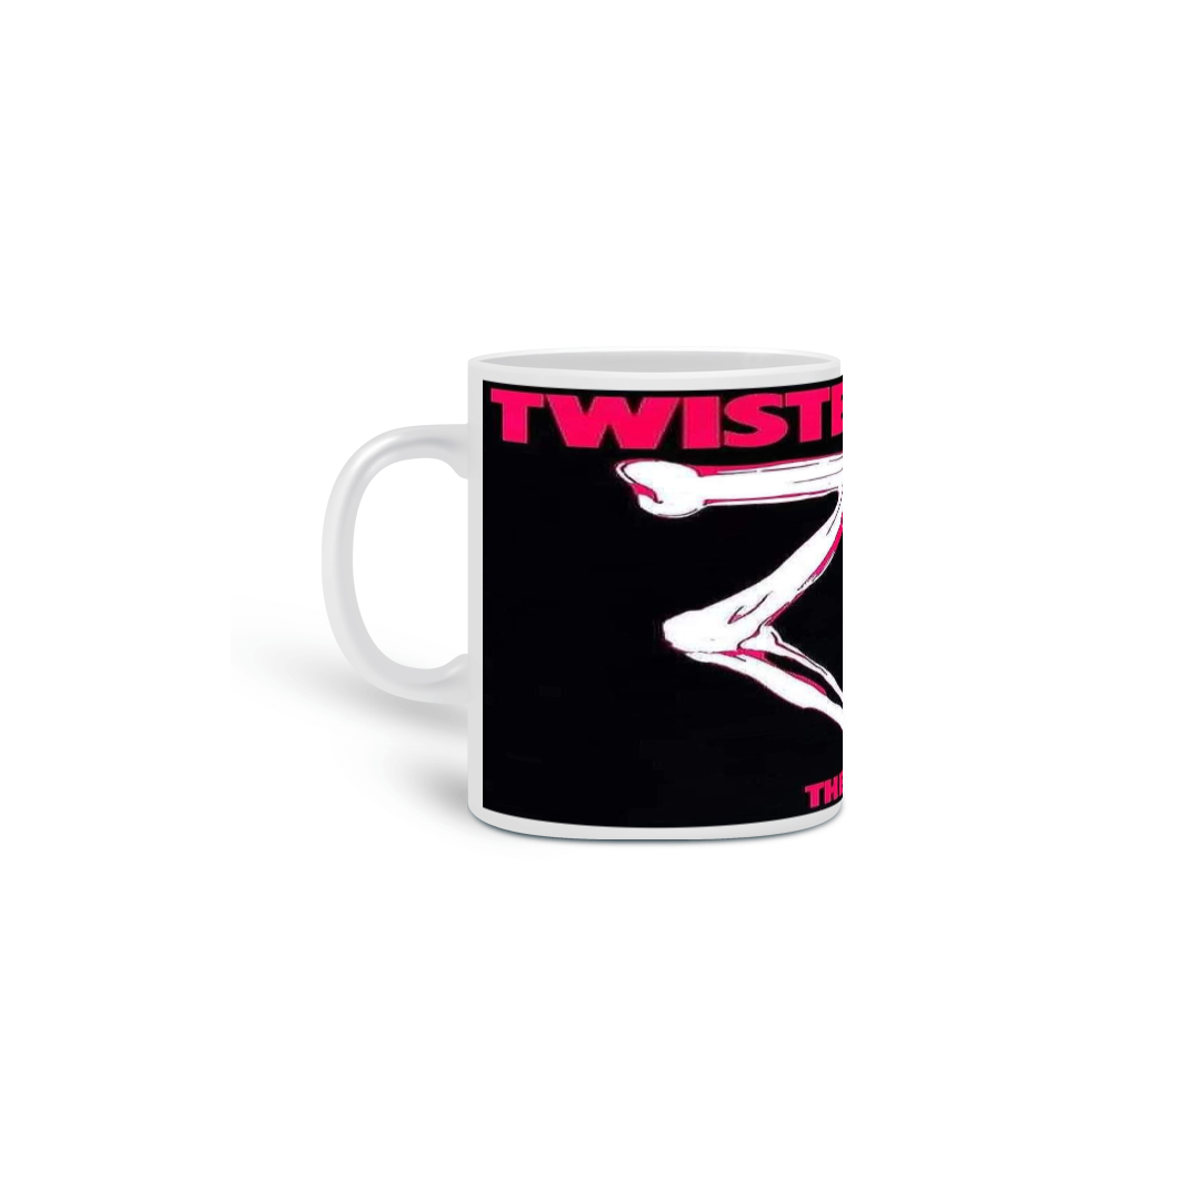 Nome do produto: Twisted Sister - The Price